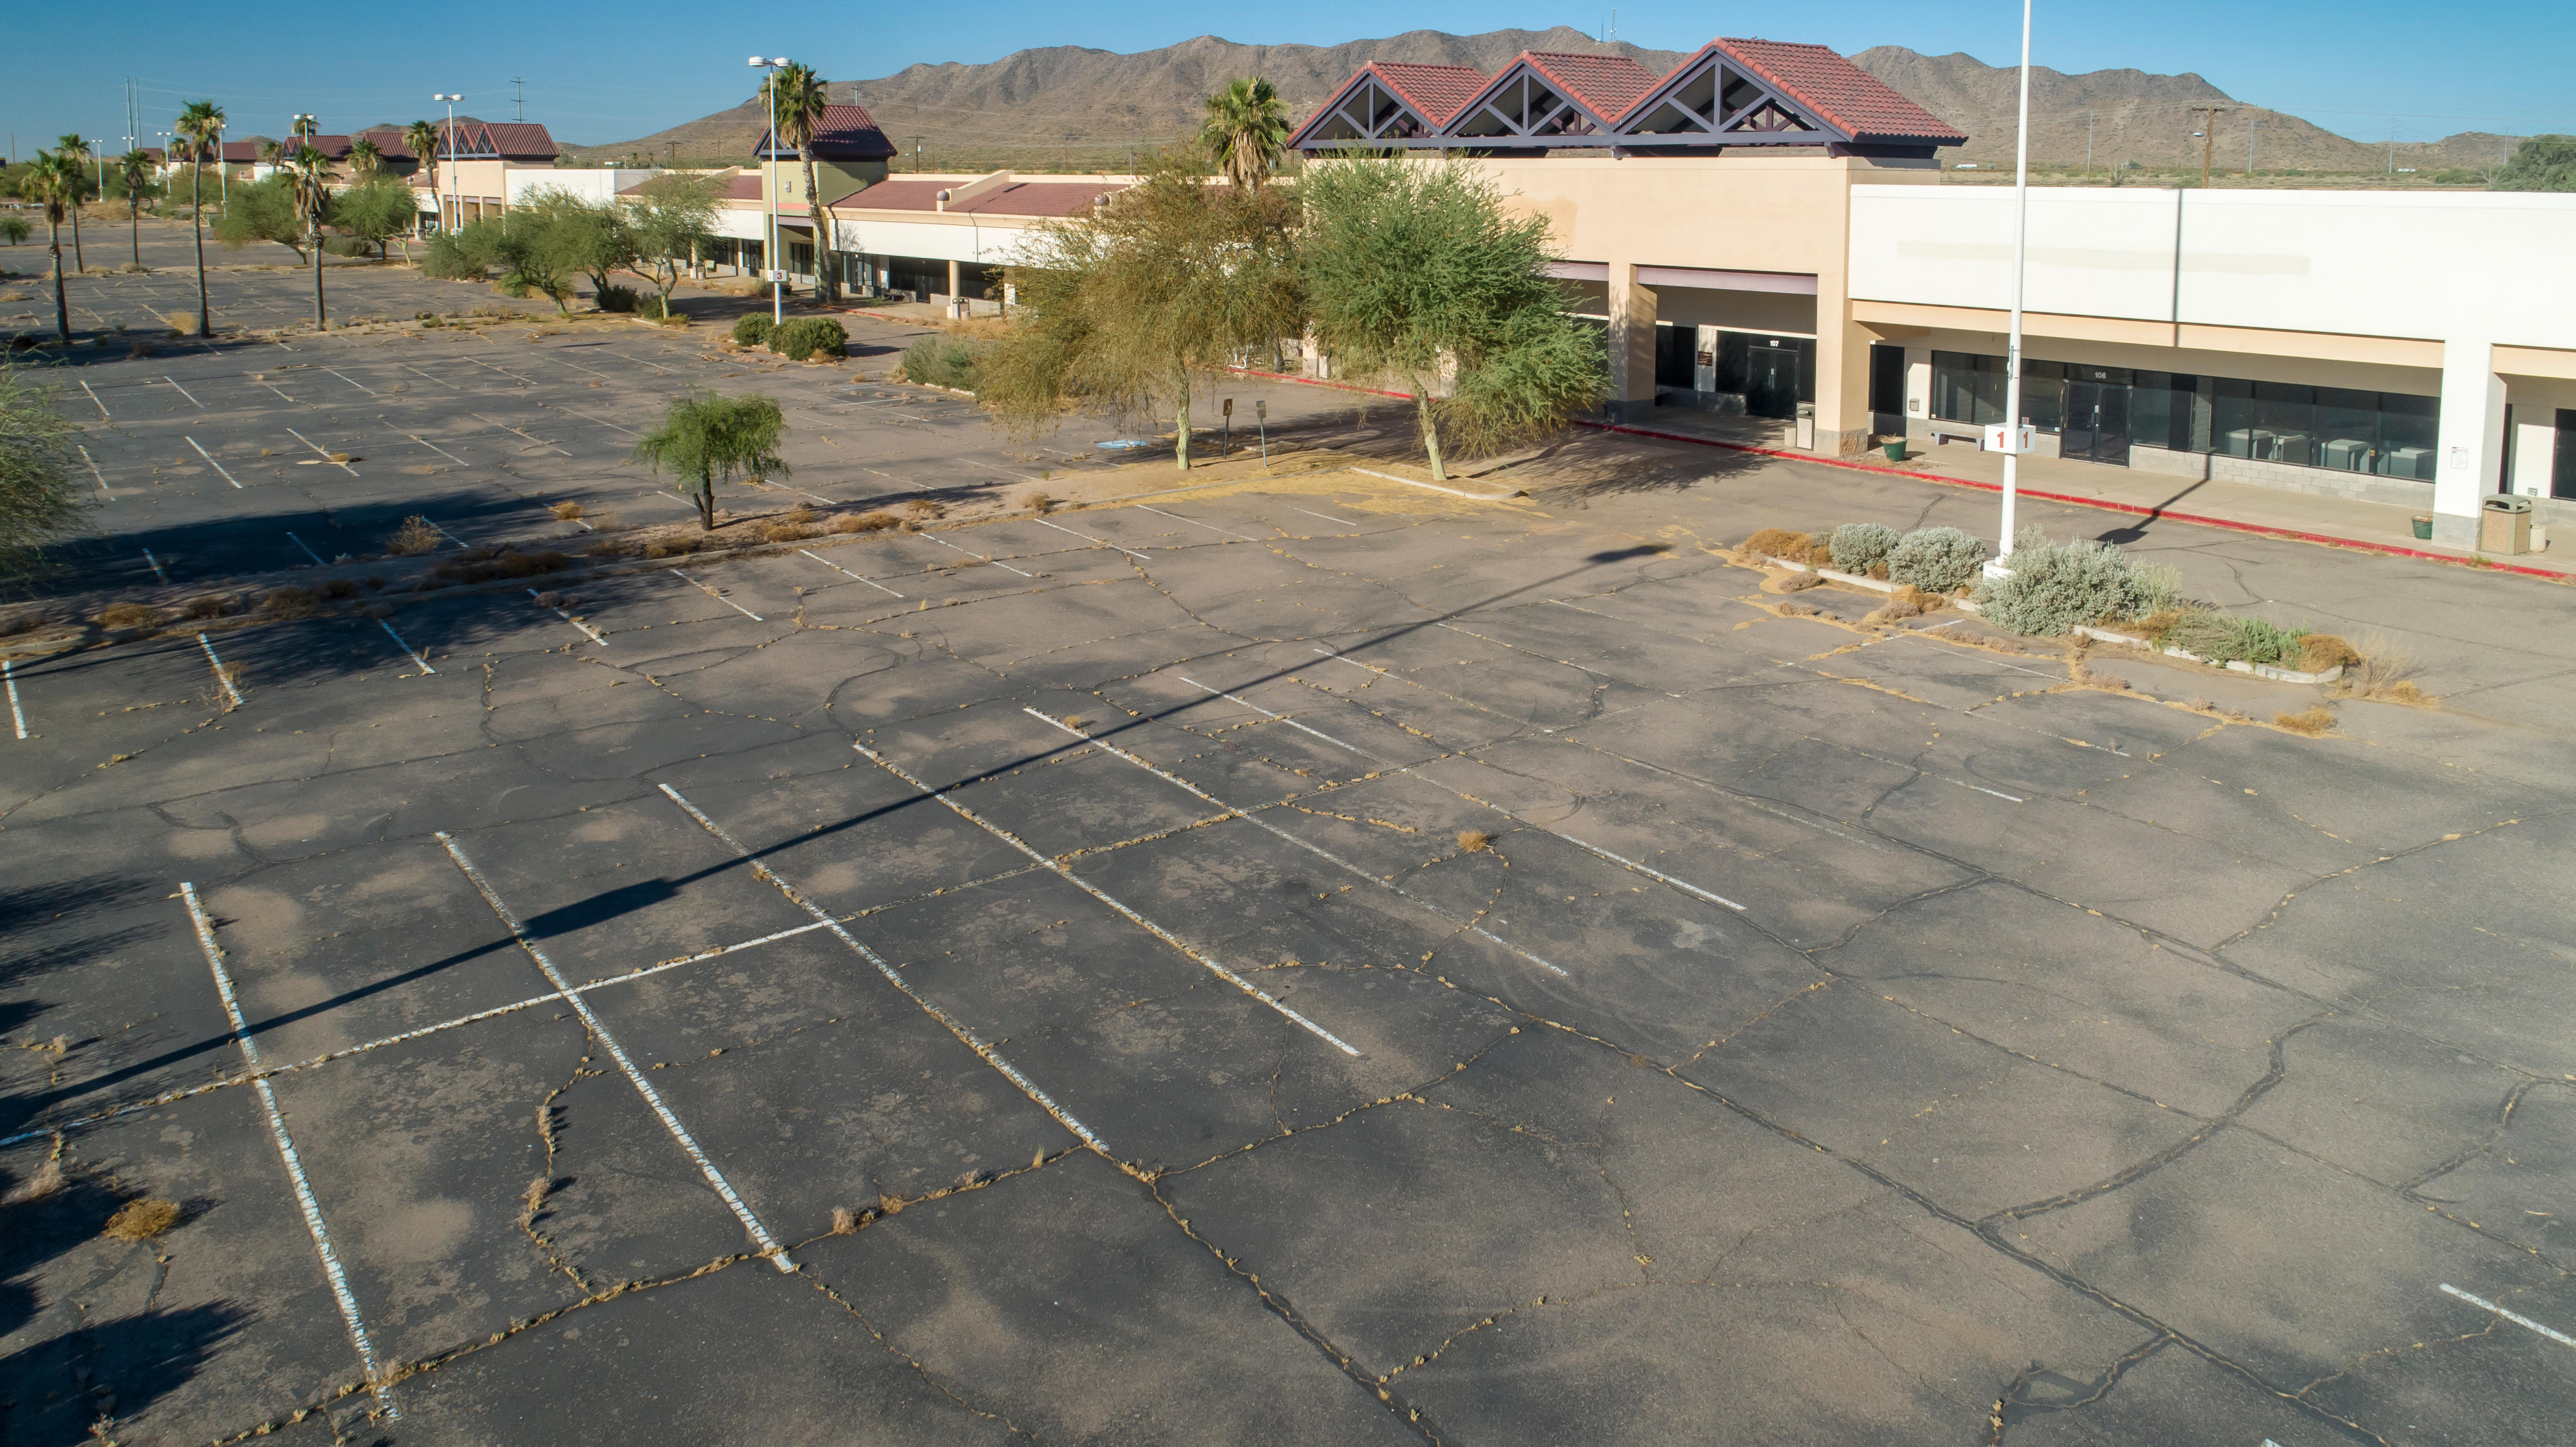 photo of How Ailing Strip Malls Could Be a Green Fix for U.S. Housing Crisis image